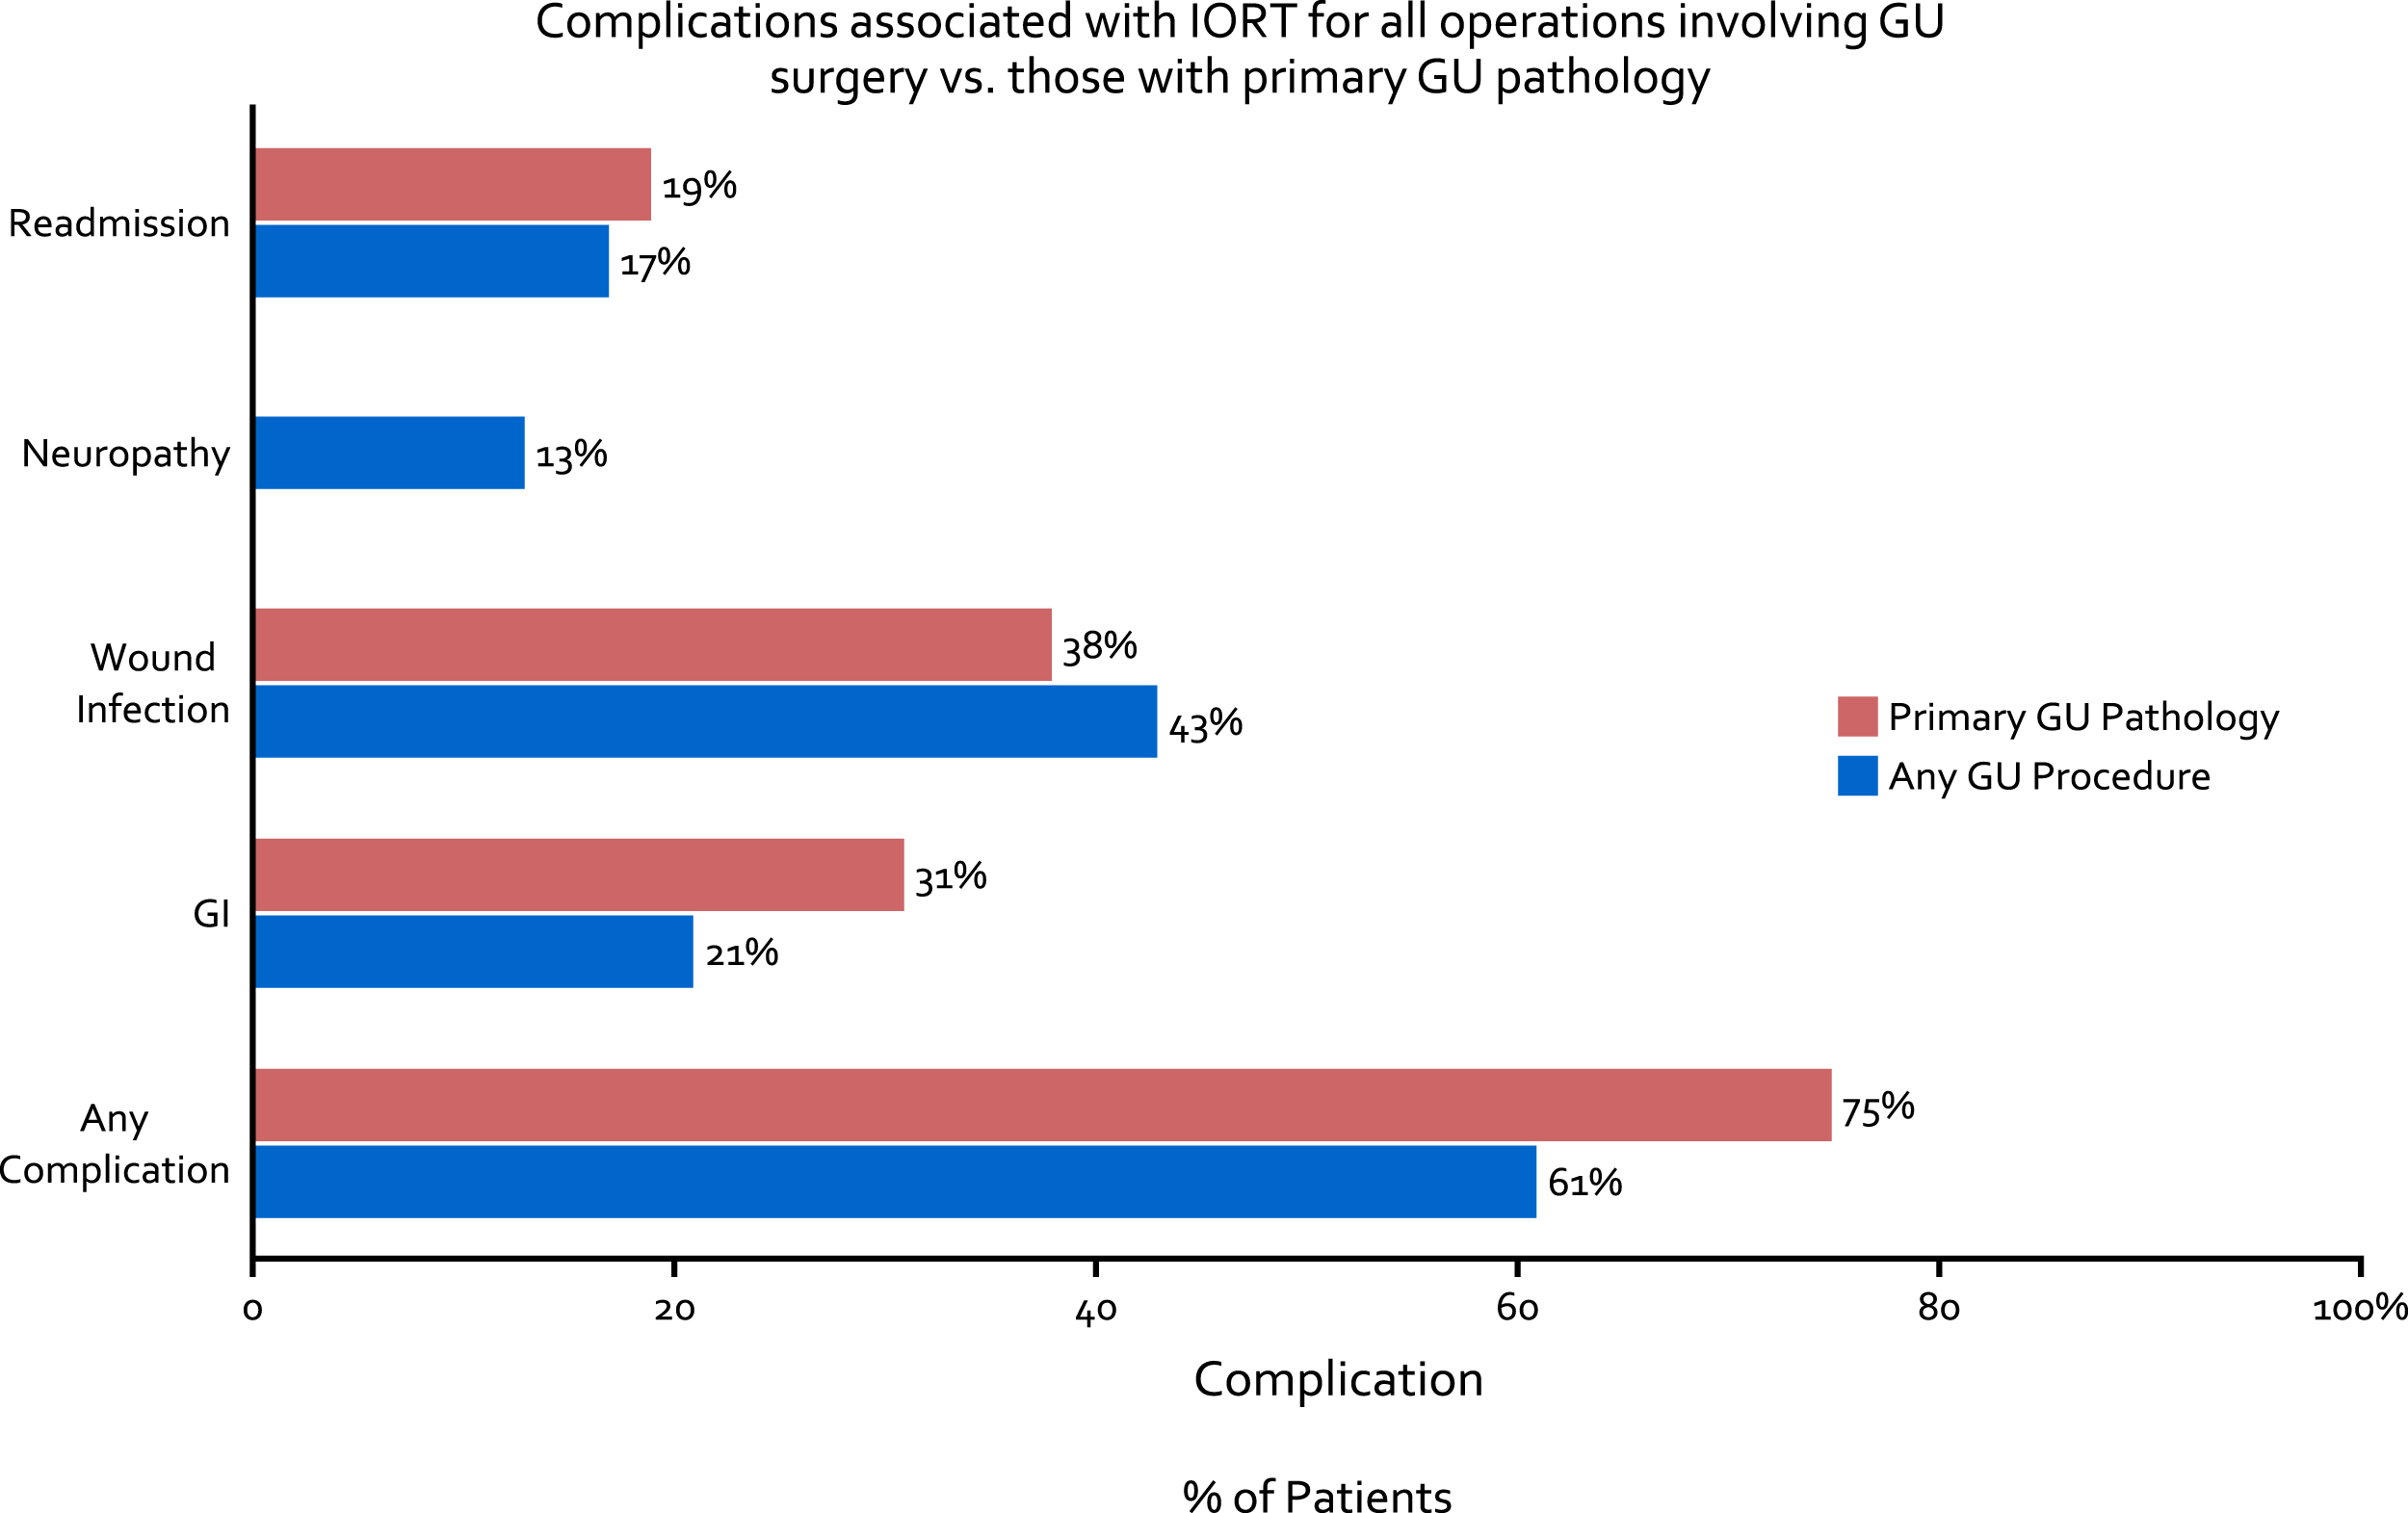 Complications associated with IORT for all operations involving GU surgery (blue bar) as well as those with primary GU pathology (red bar).